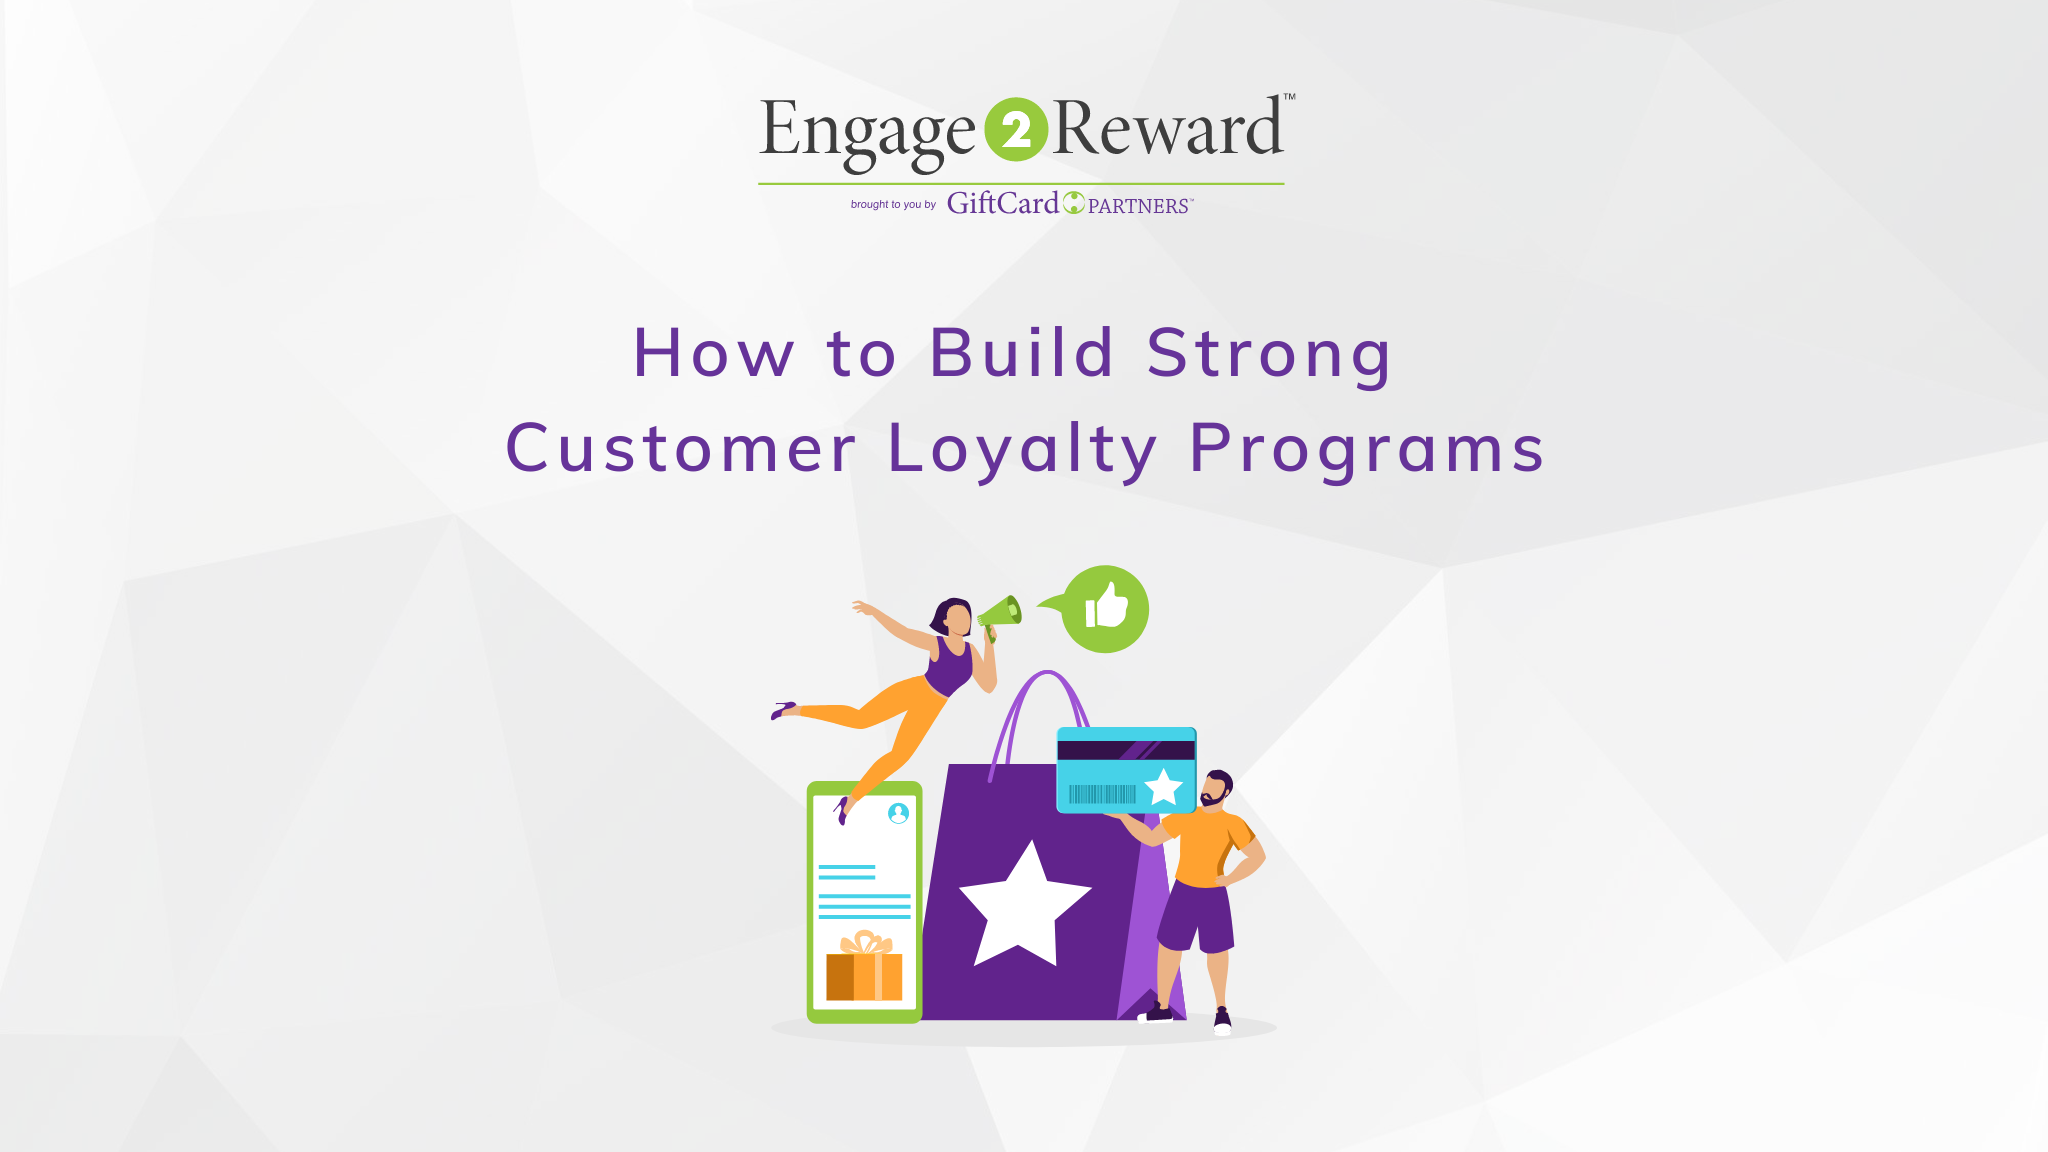 How to Build Strong Customer Loyalty Programs